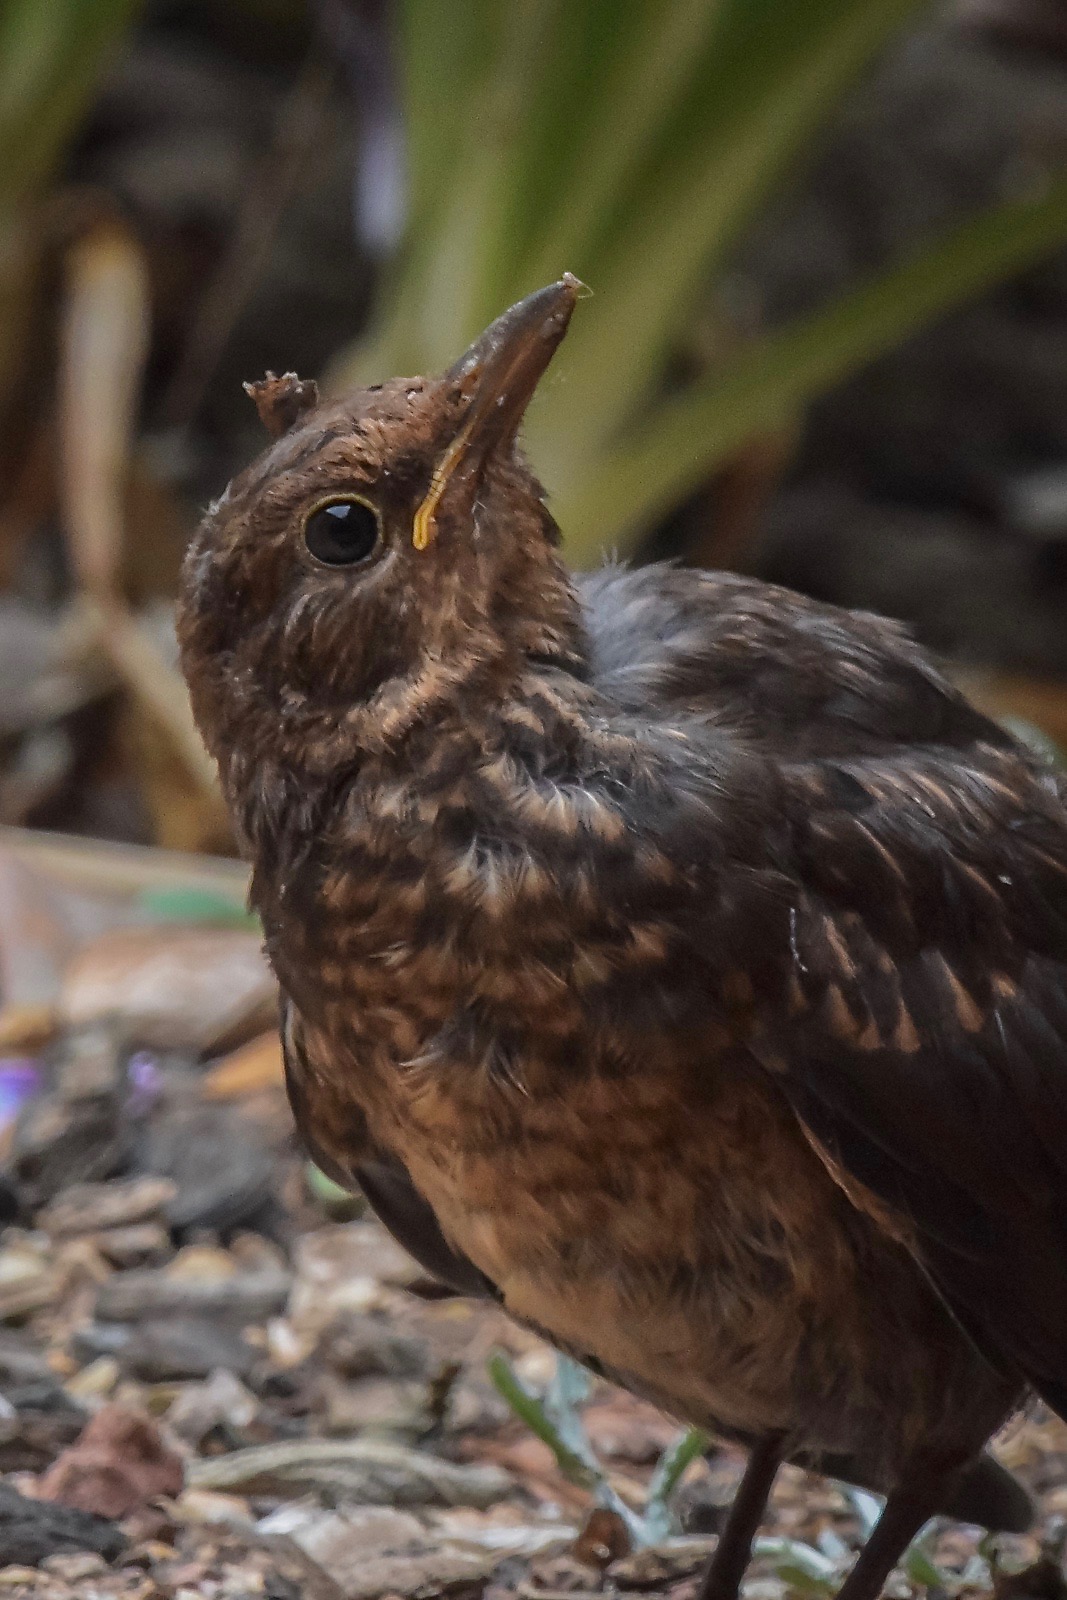 Common they may be, but this young Blackbird is a joy to watch as it learns the world around